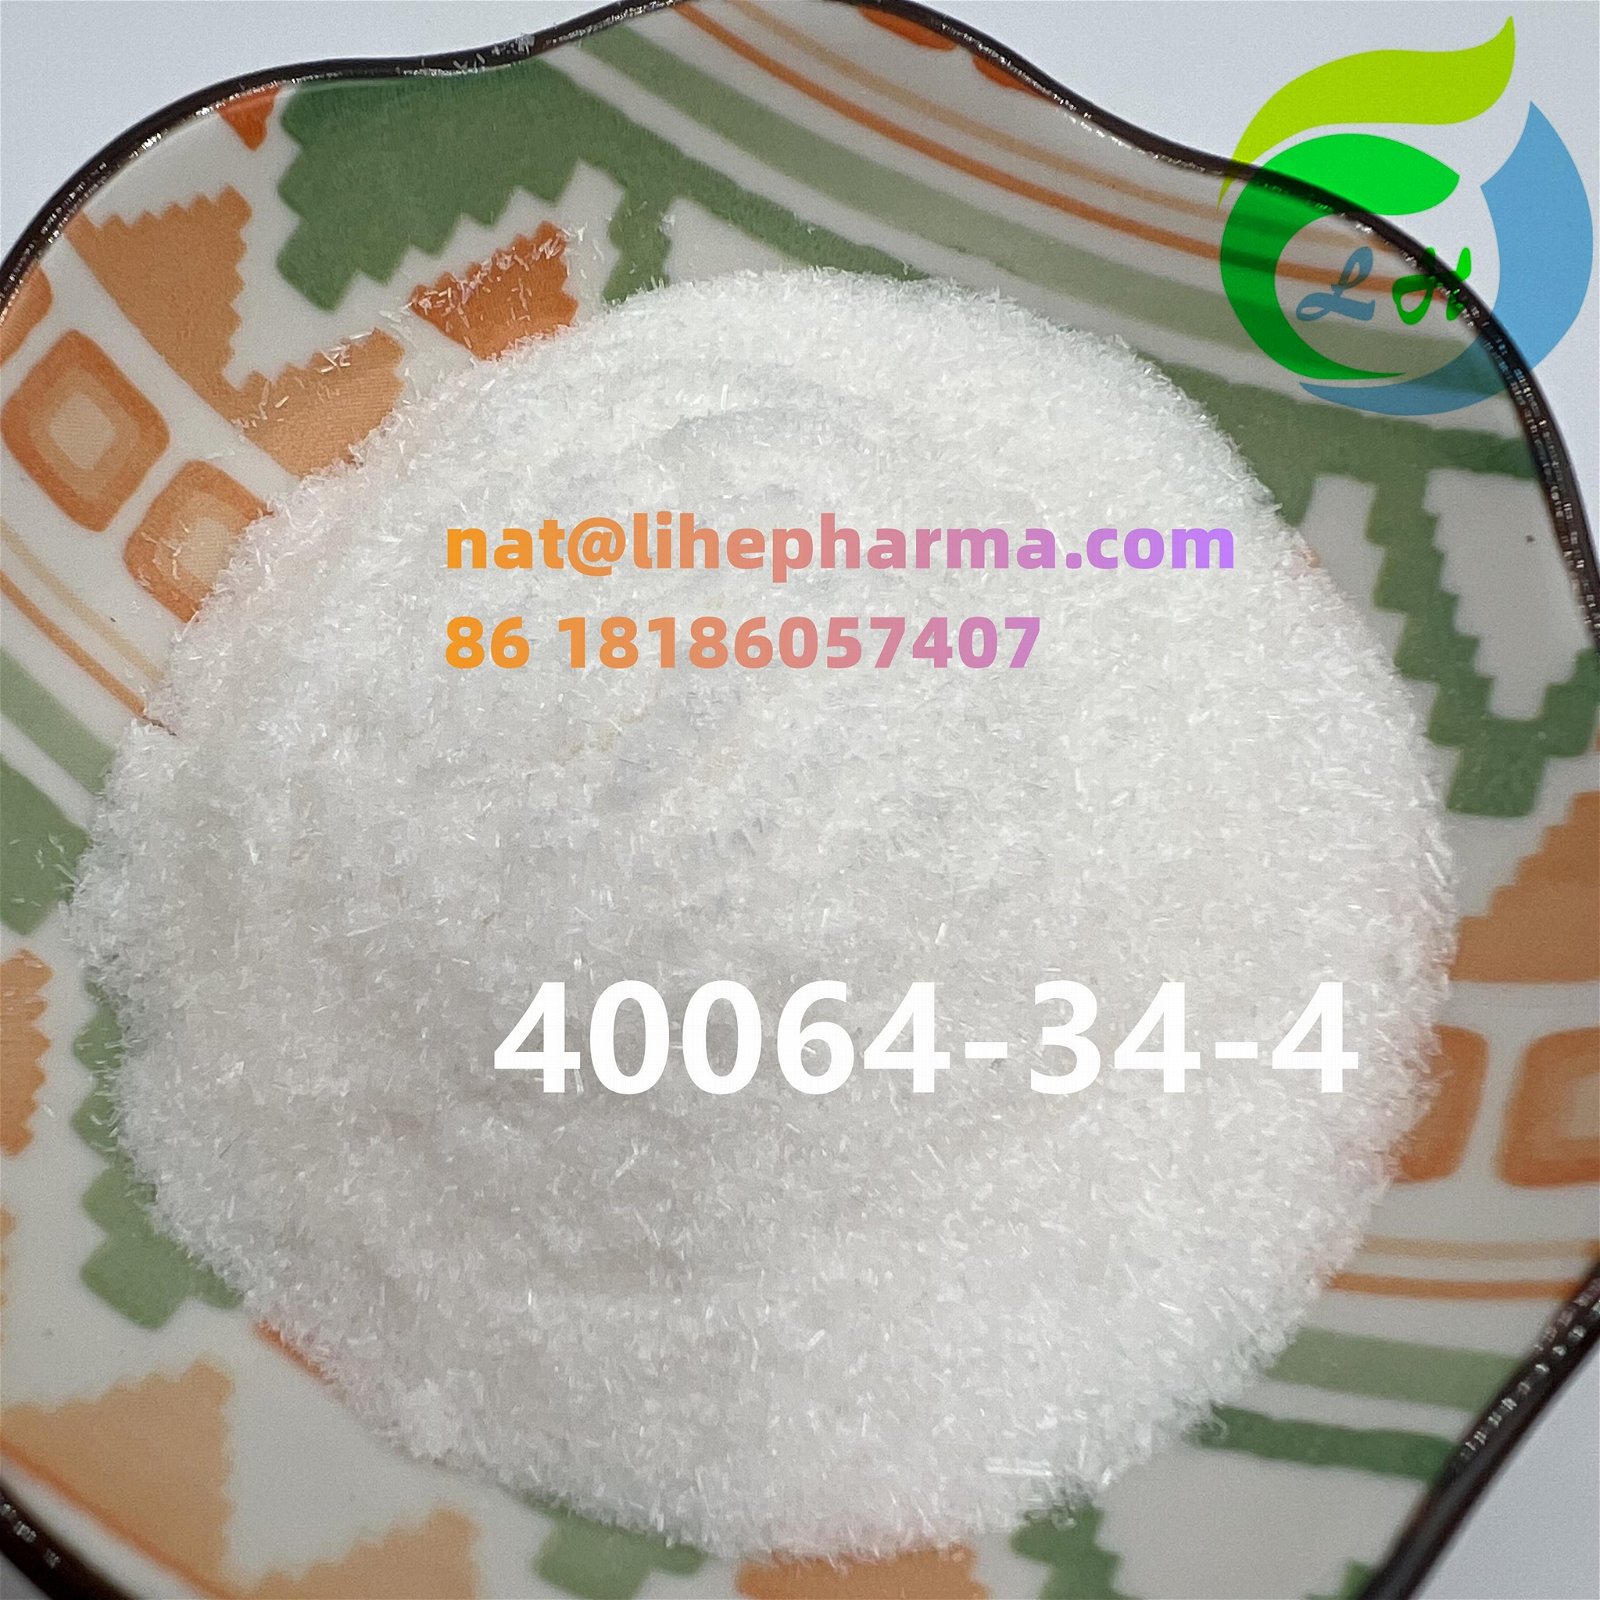 TOP quality44-Piperidinediol hydrochloride 99.2% White Solid 40064-34-4